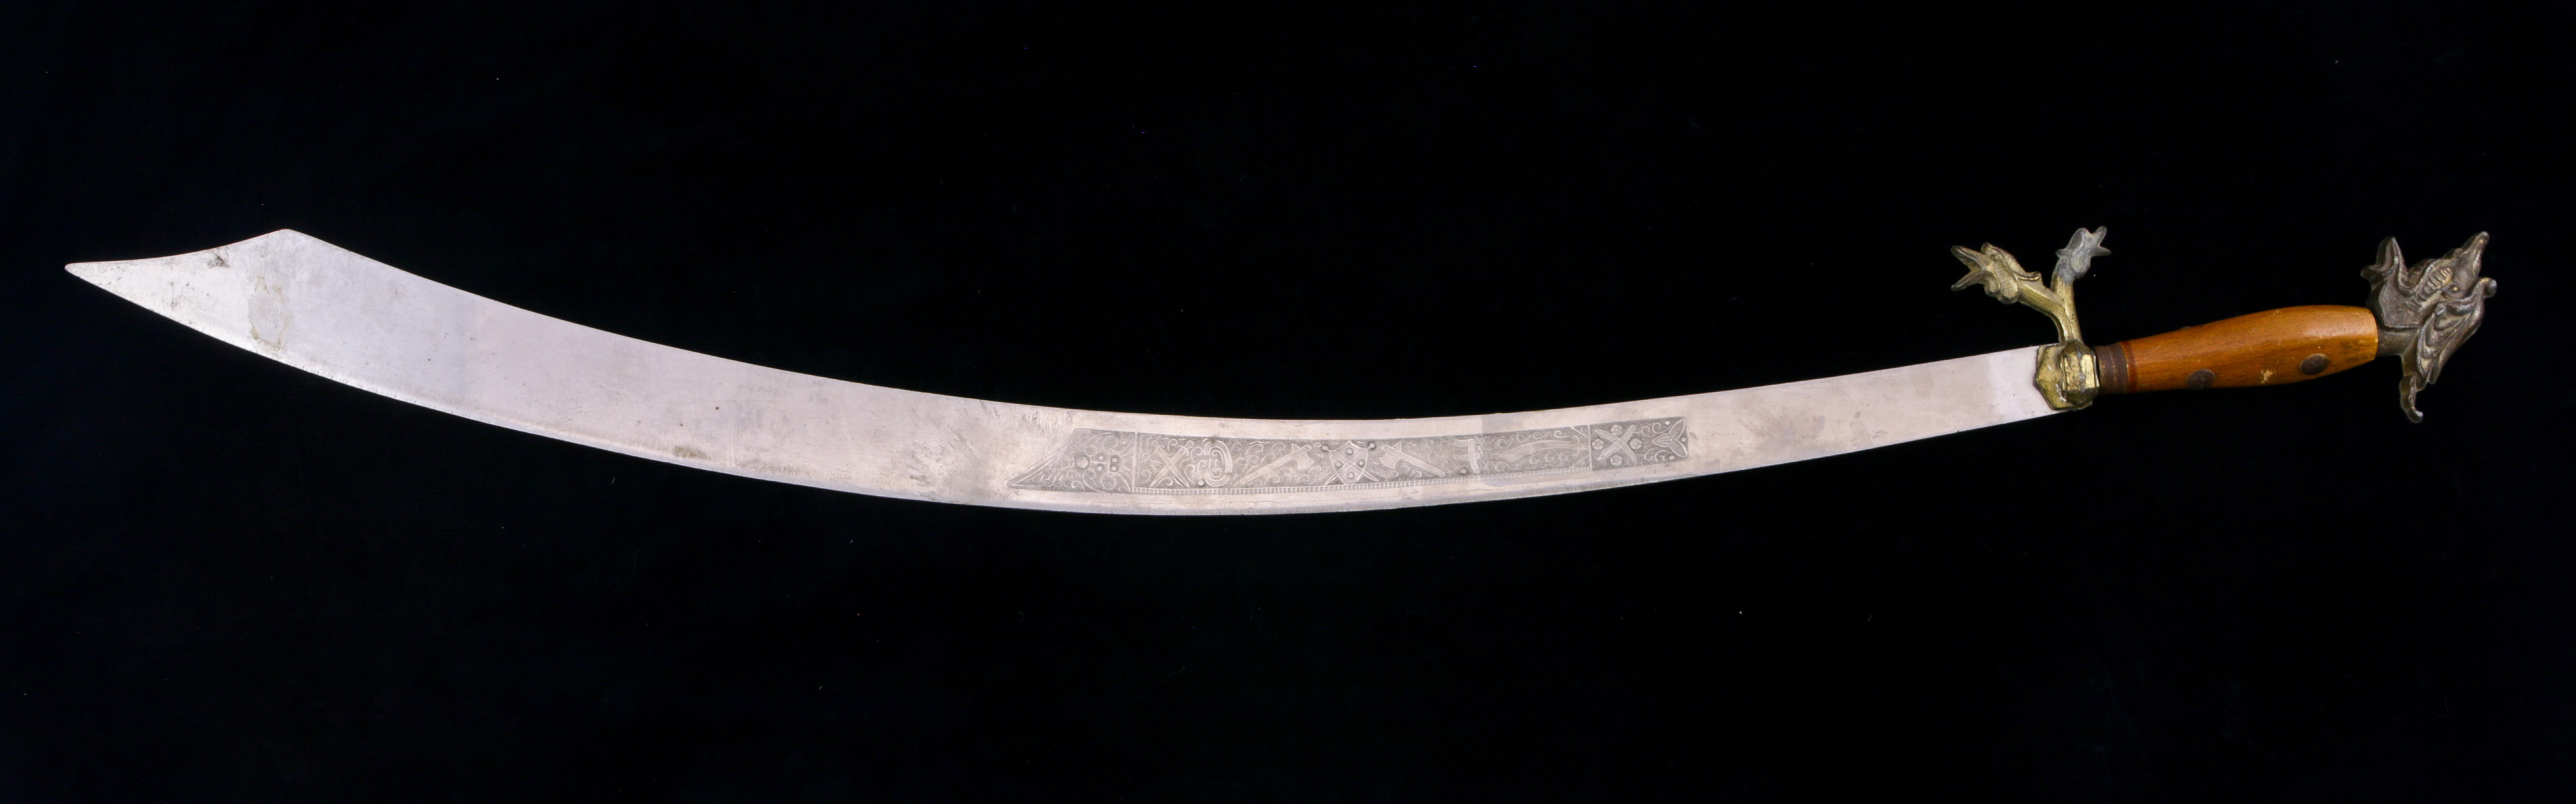 A CHINESE DAO (SABRE FOR SLASHING